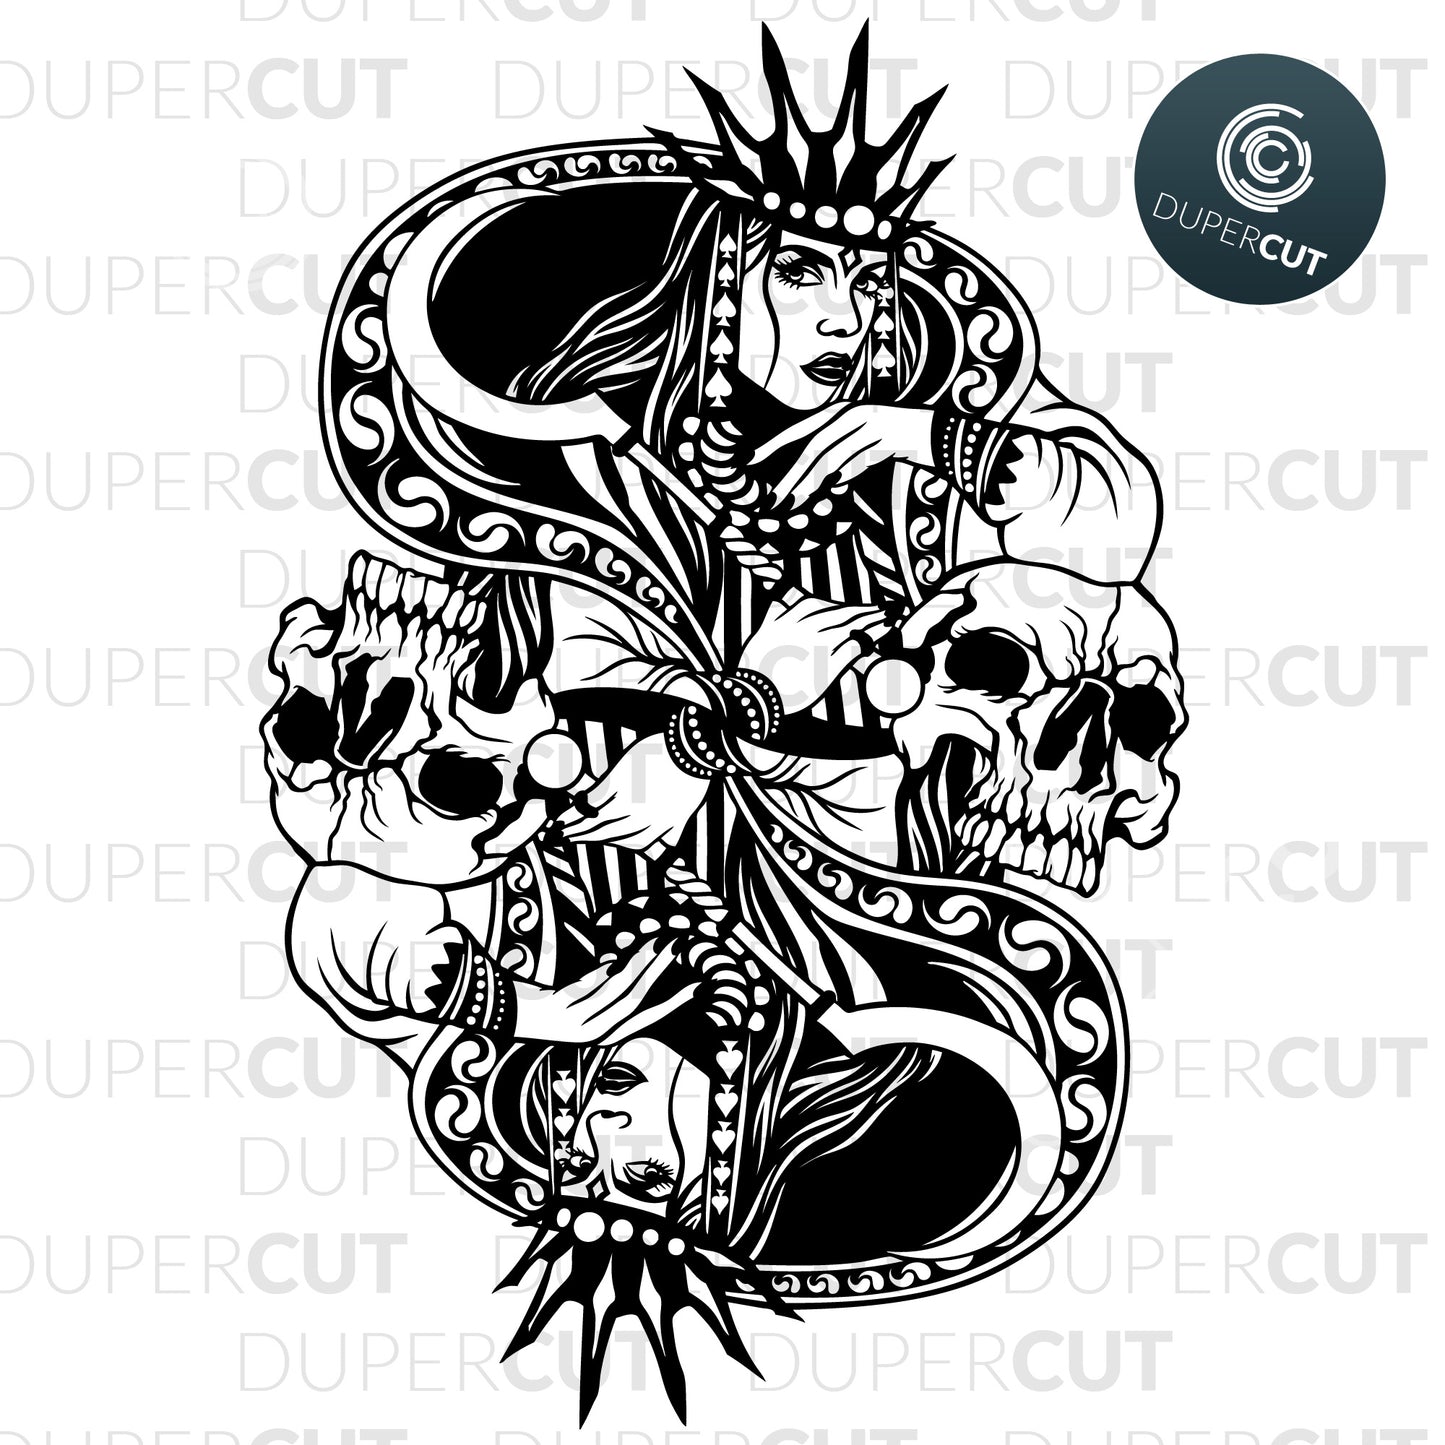 Queen of spades, playing cards black gothic art. SVG PNG DXF cutting files for Cricut, Silhouette, Glowforge, print on demand, sublimation templates